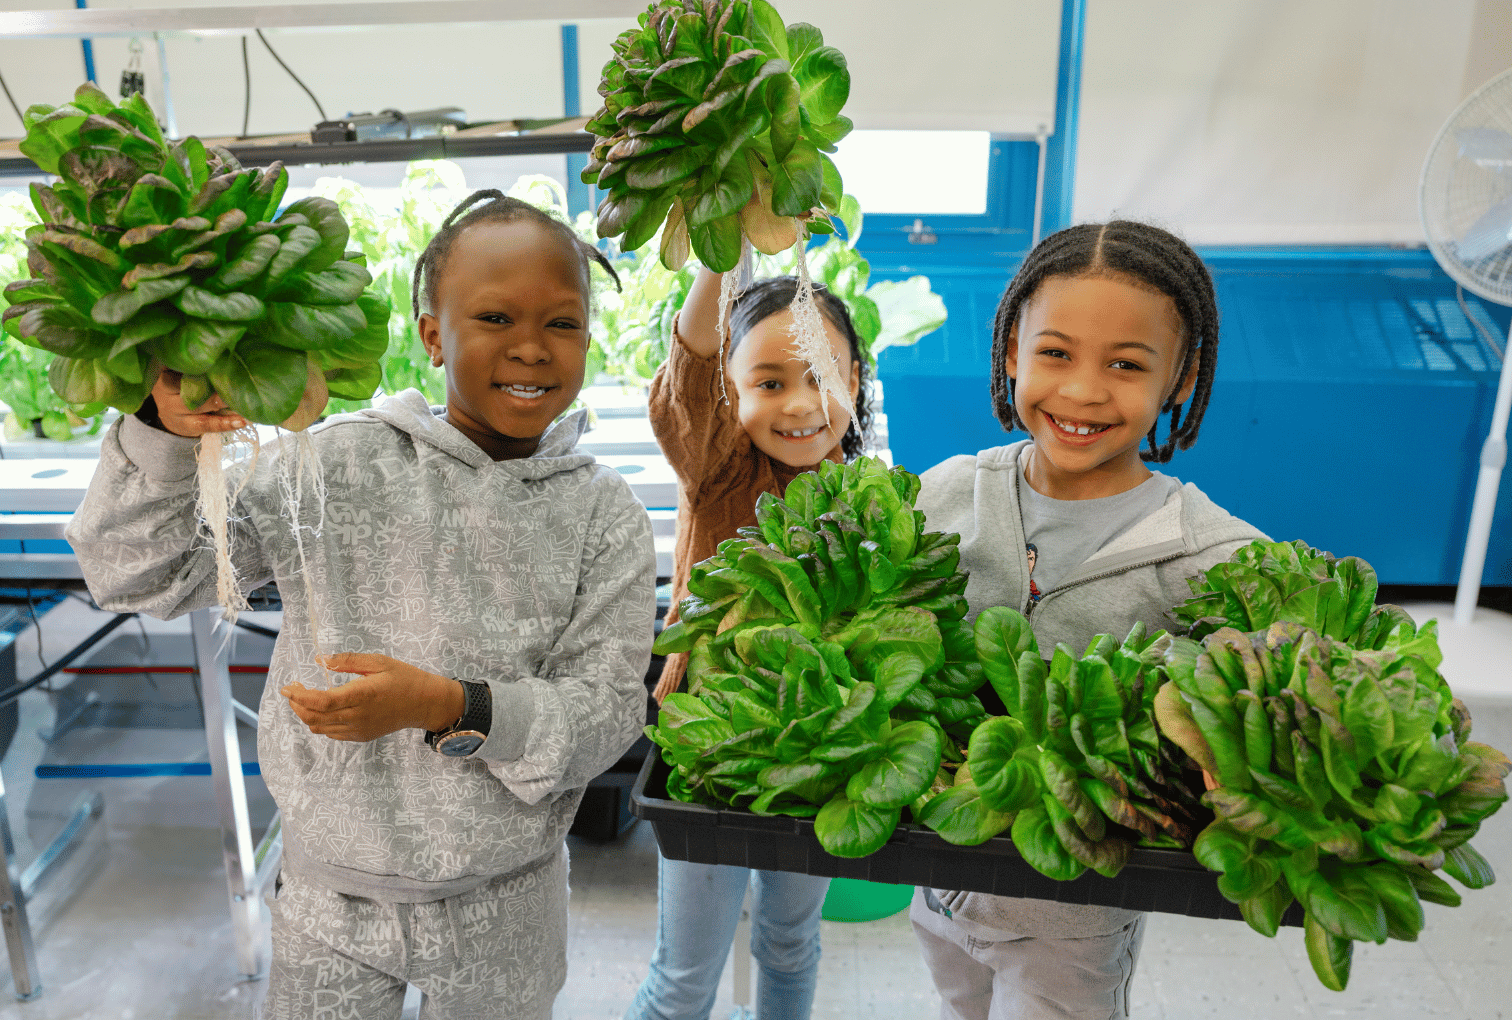 three young students hold lettuce harvested from hydroponic systems and smile